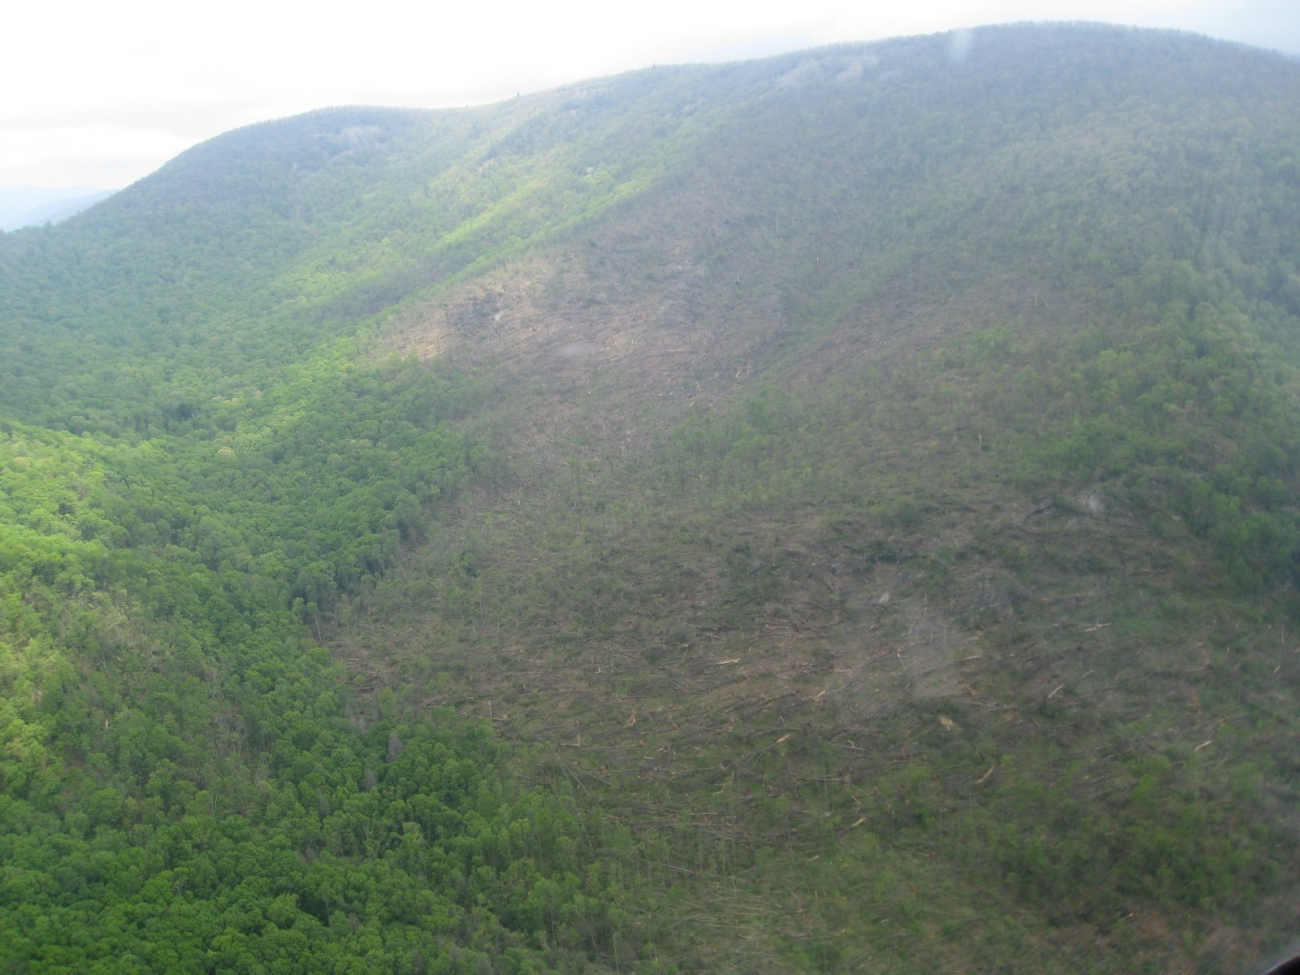 Thousands of trees were blown down in Chattahoochee National Forest by theEF2 tornado that struck Lumpkin and White Counties